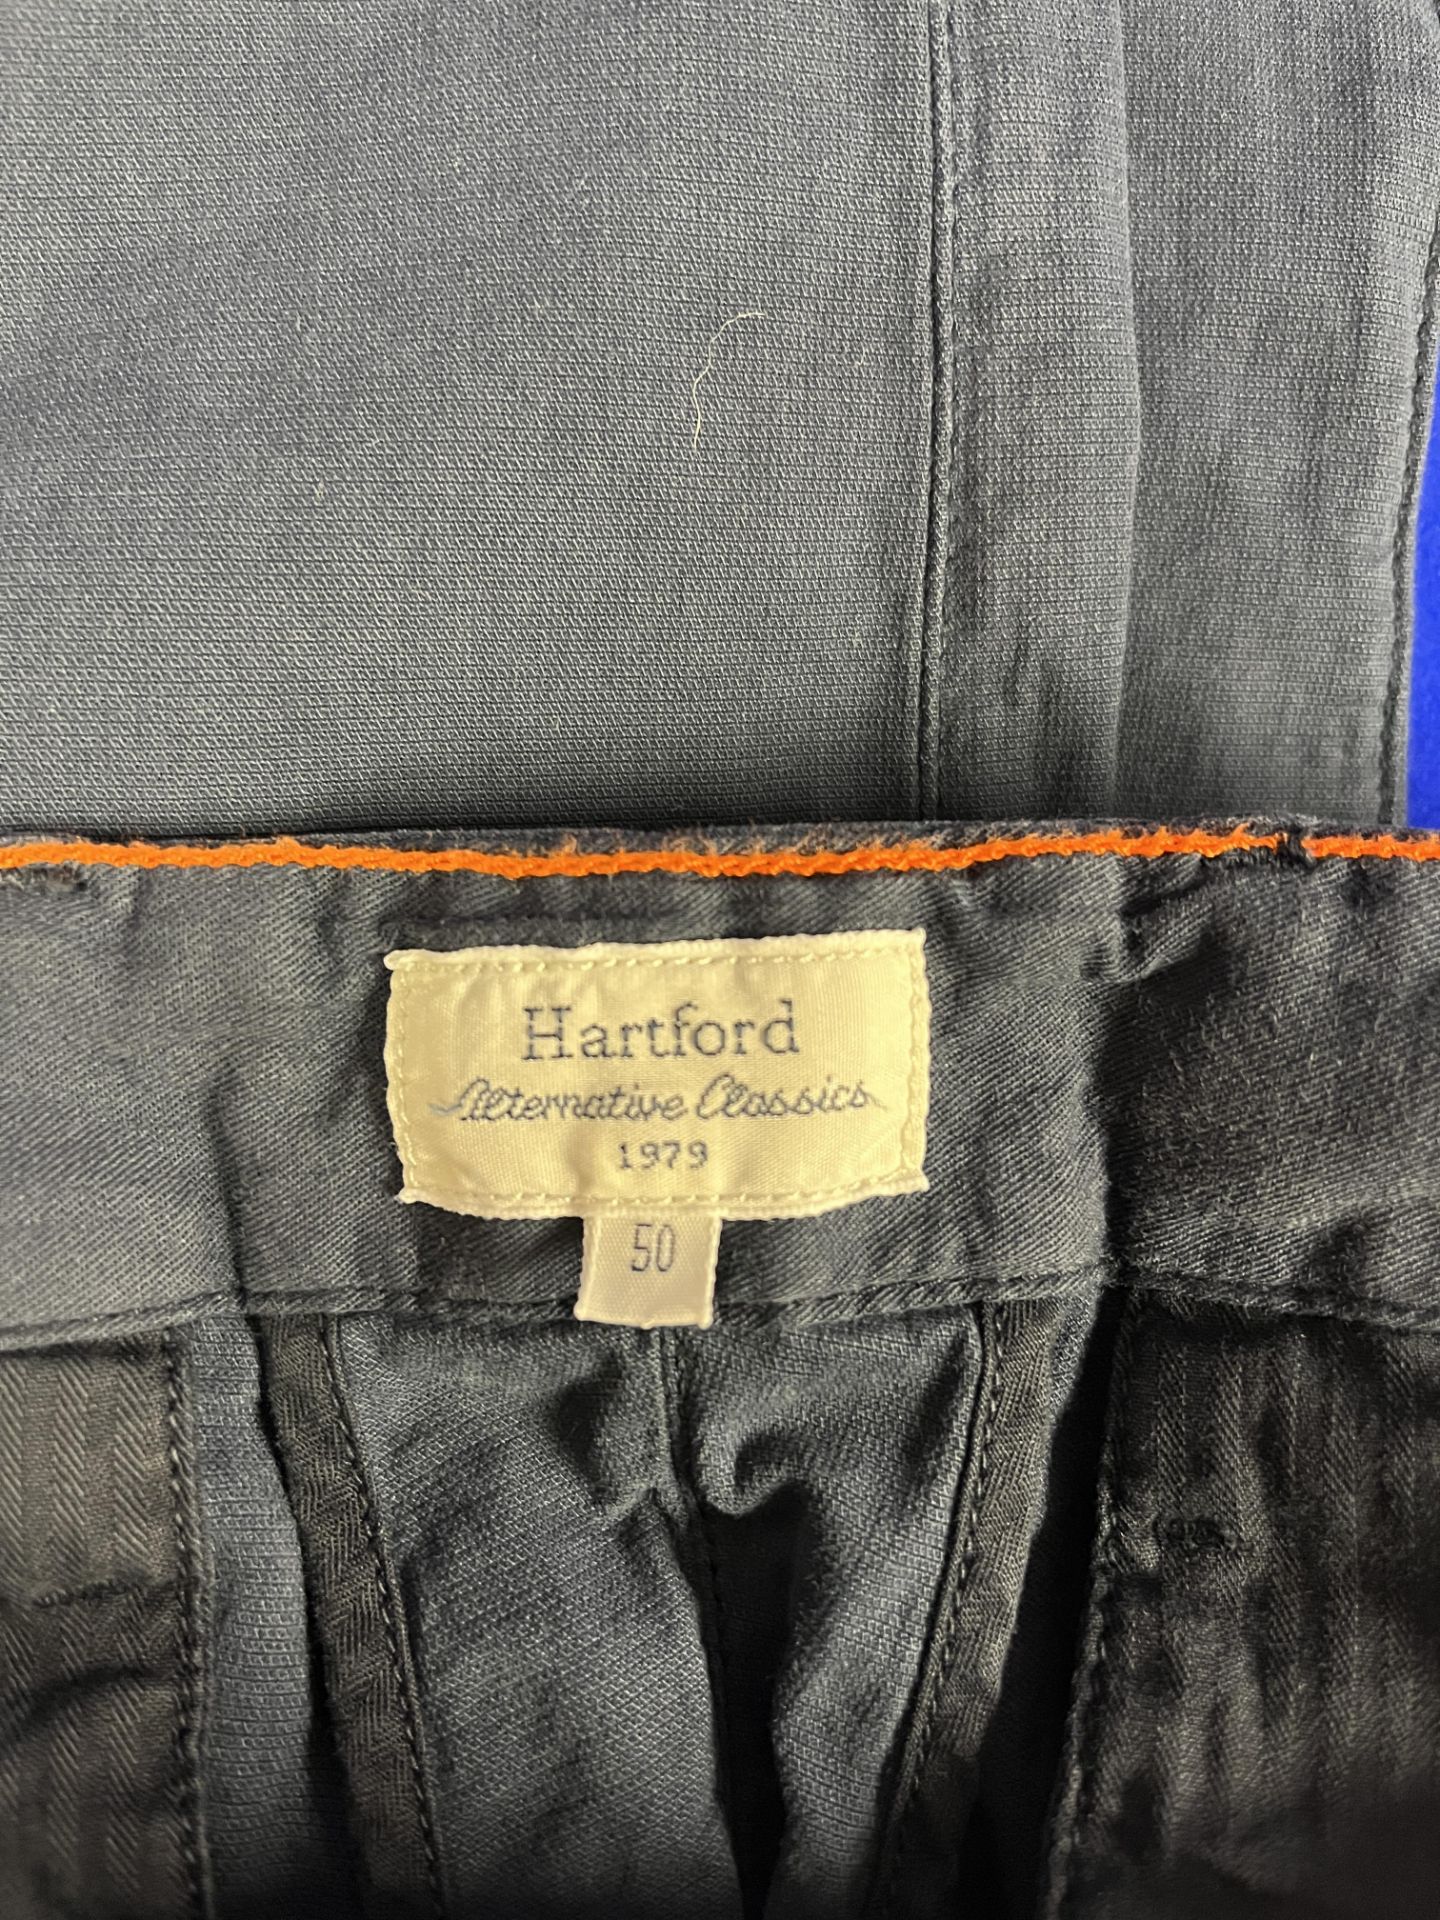 Men's Trousers - See Description for Type/Size - Image 8 of 22